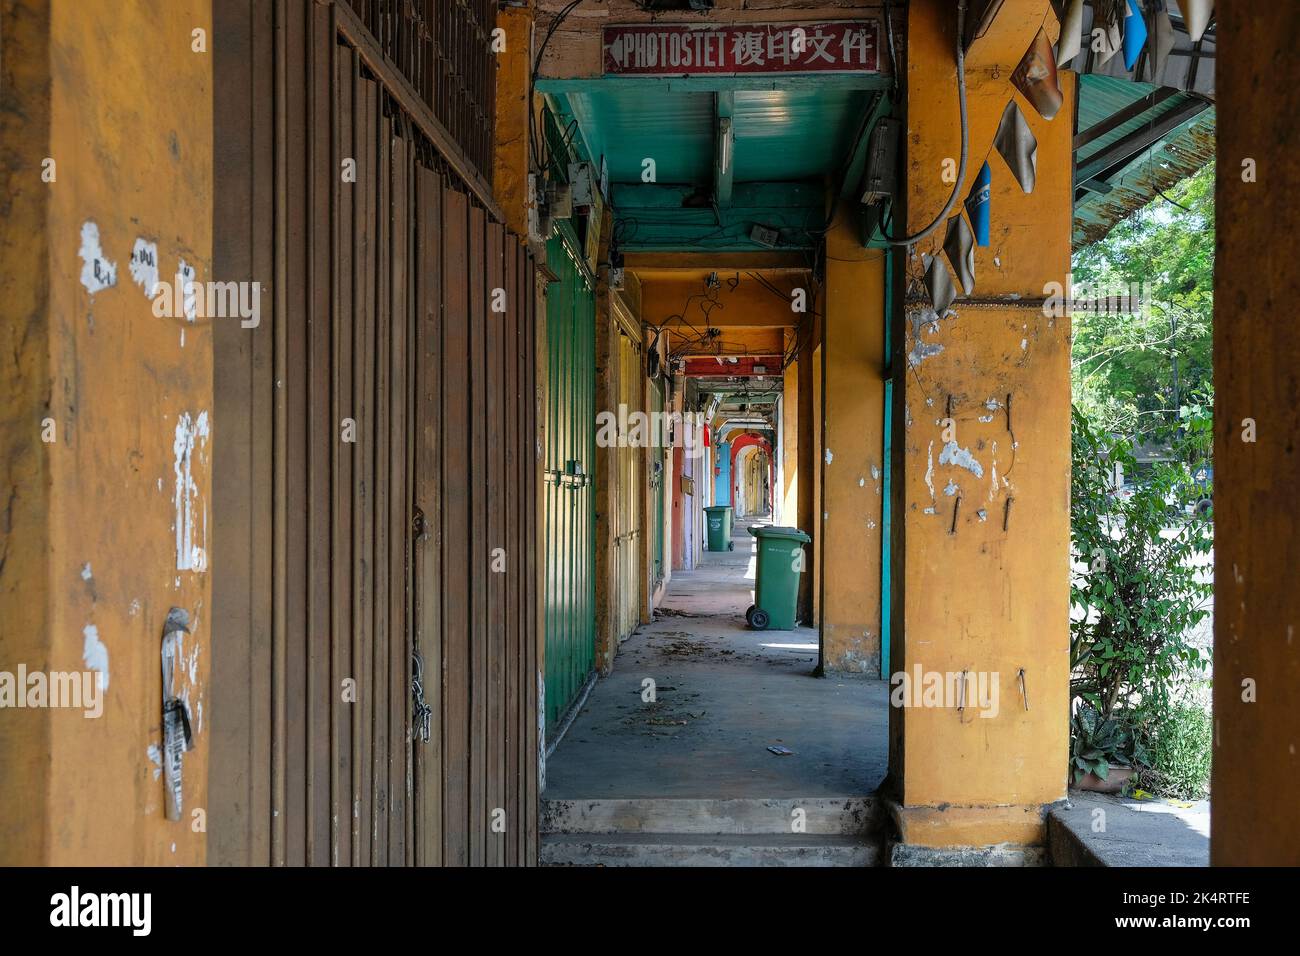 Pekan, Malaysia - September 2022: Detail of the facade of a traditional house in Pekan on September 26, 2022 in Pekan, Malaysia. Stock Photo